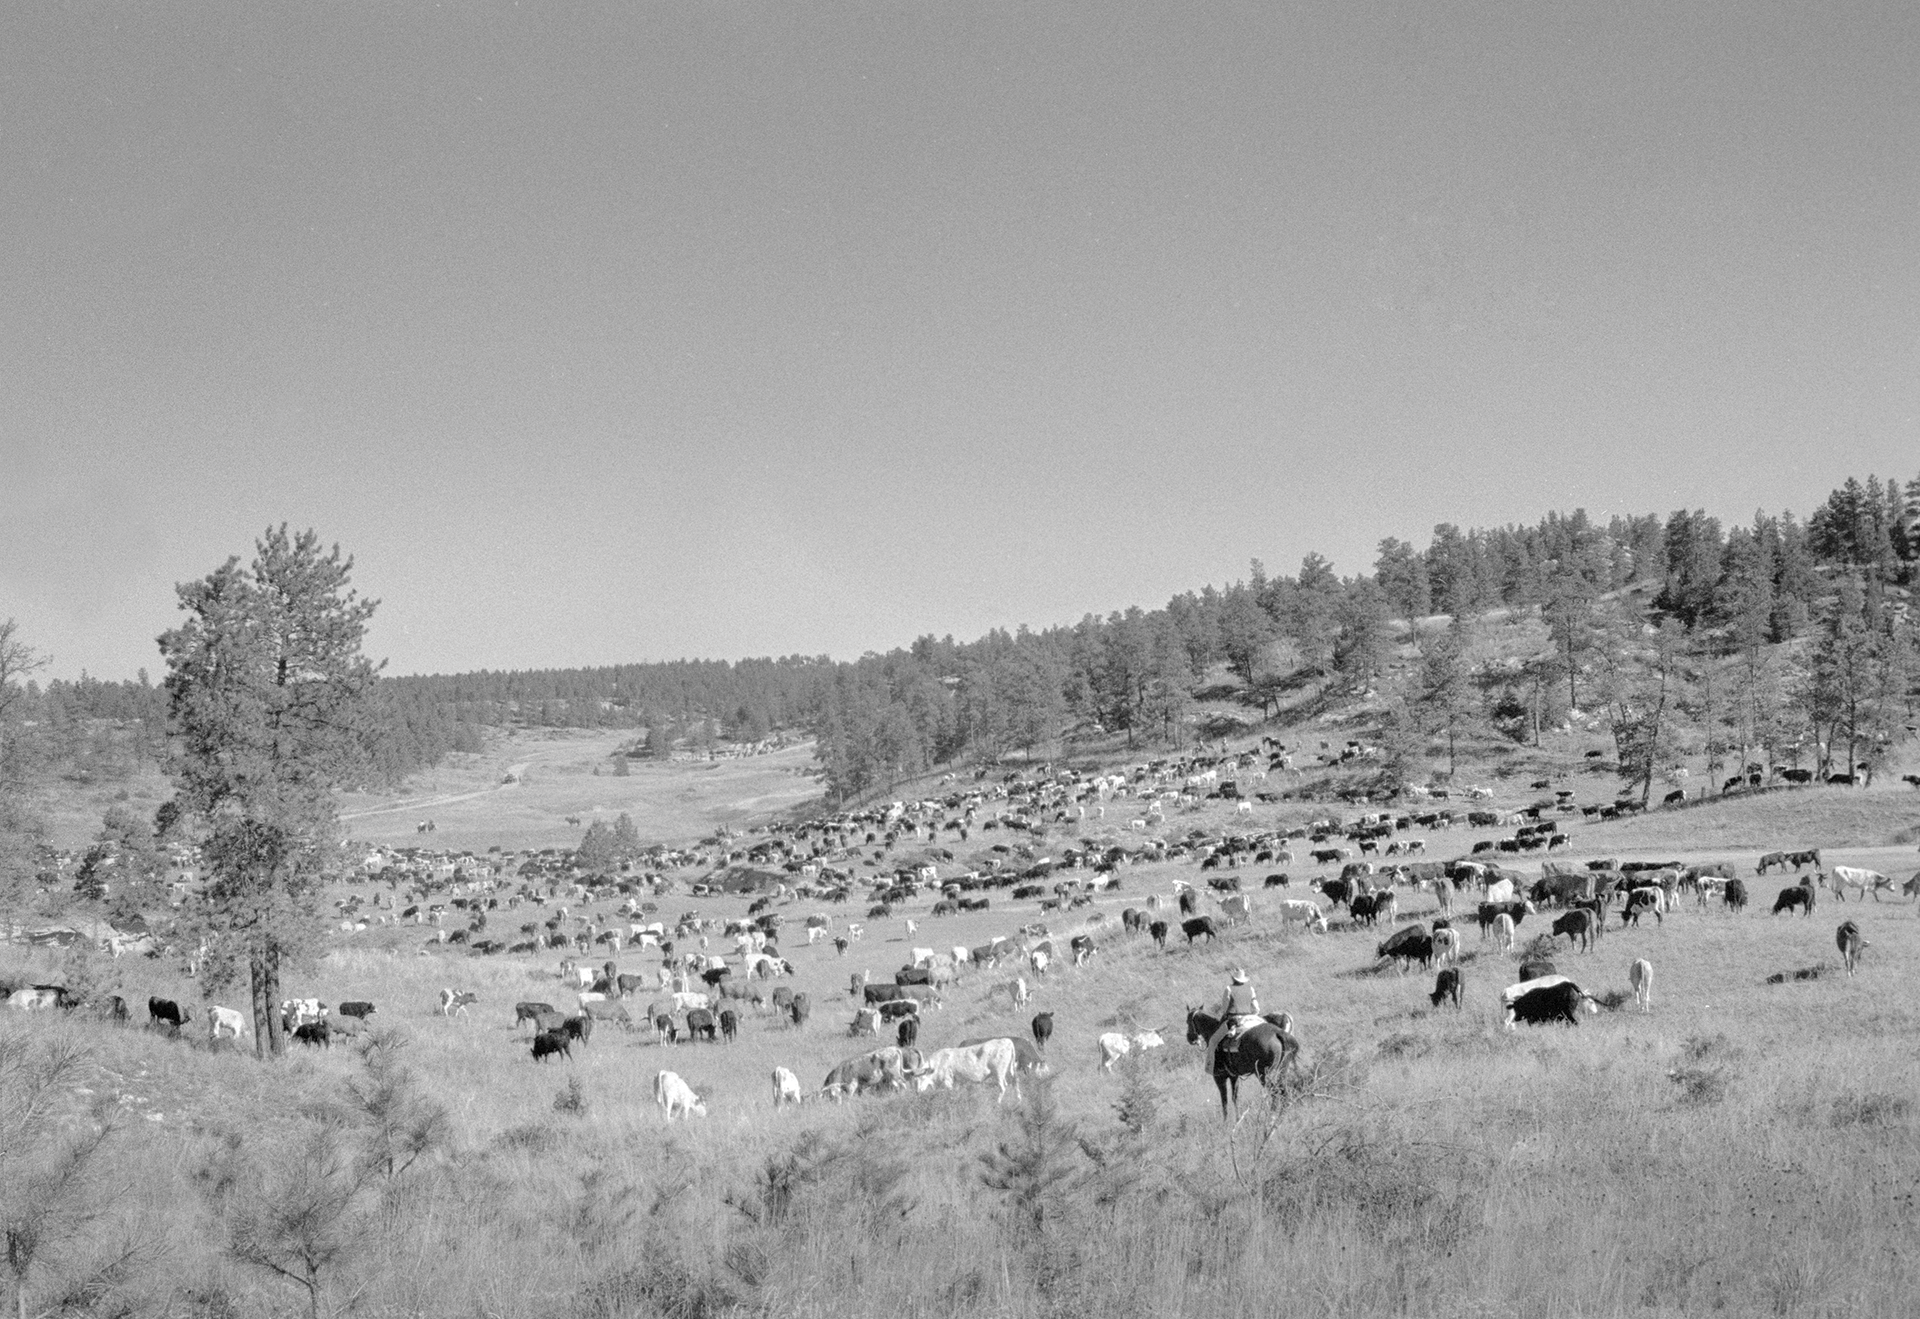 A herd of cows and sheep graze together in a high mountain meadow under the bright summer sun.